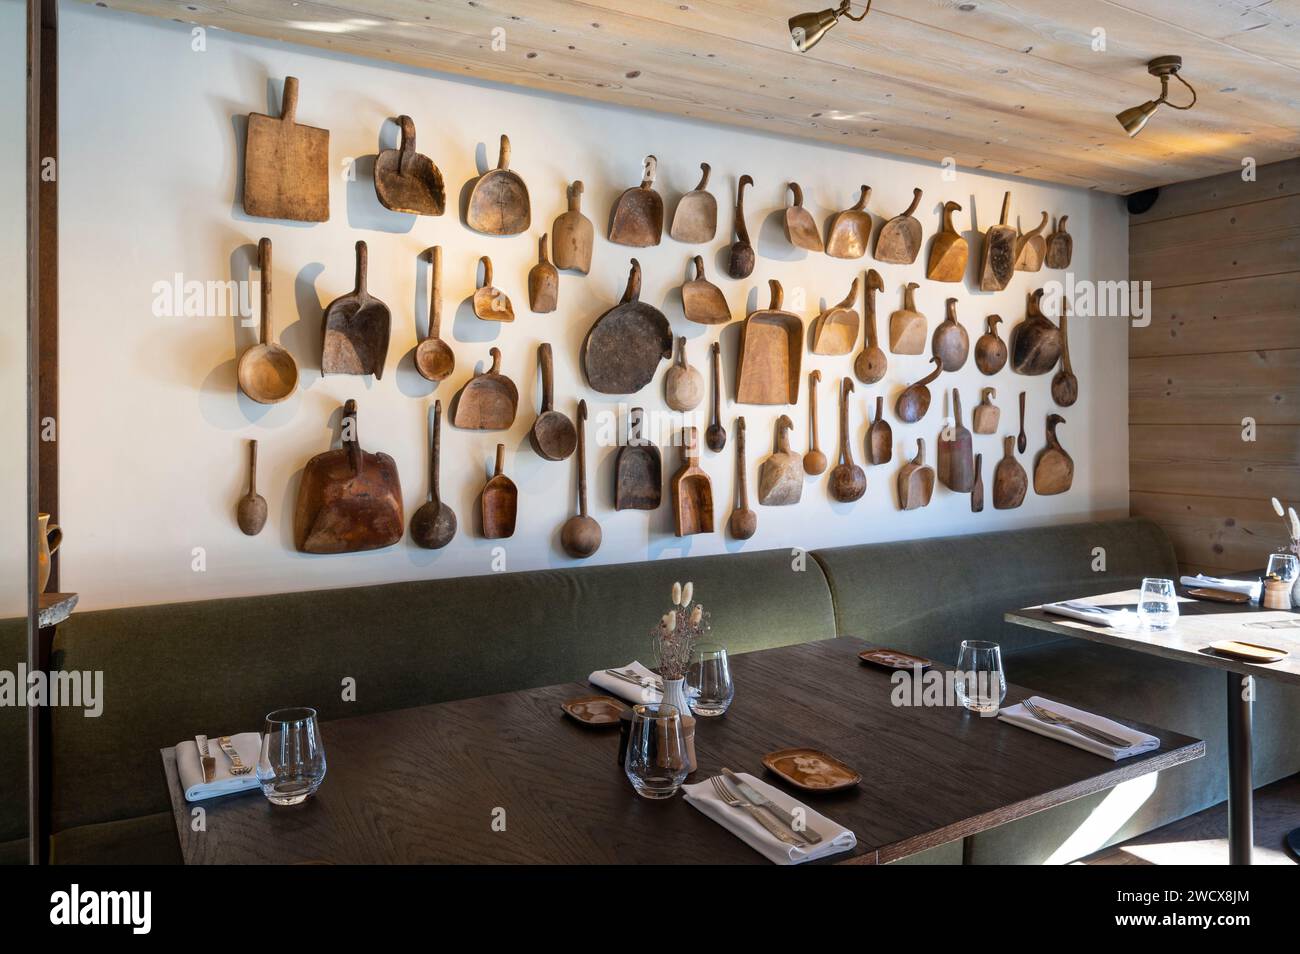 France, Haute Savoie, Megeve, 5-star hotel l'Alpaga, in the room of the restaurant Bistro de l'Alpaga, a collection of wooden curd shovels Stock Photo